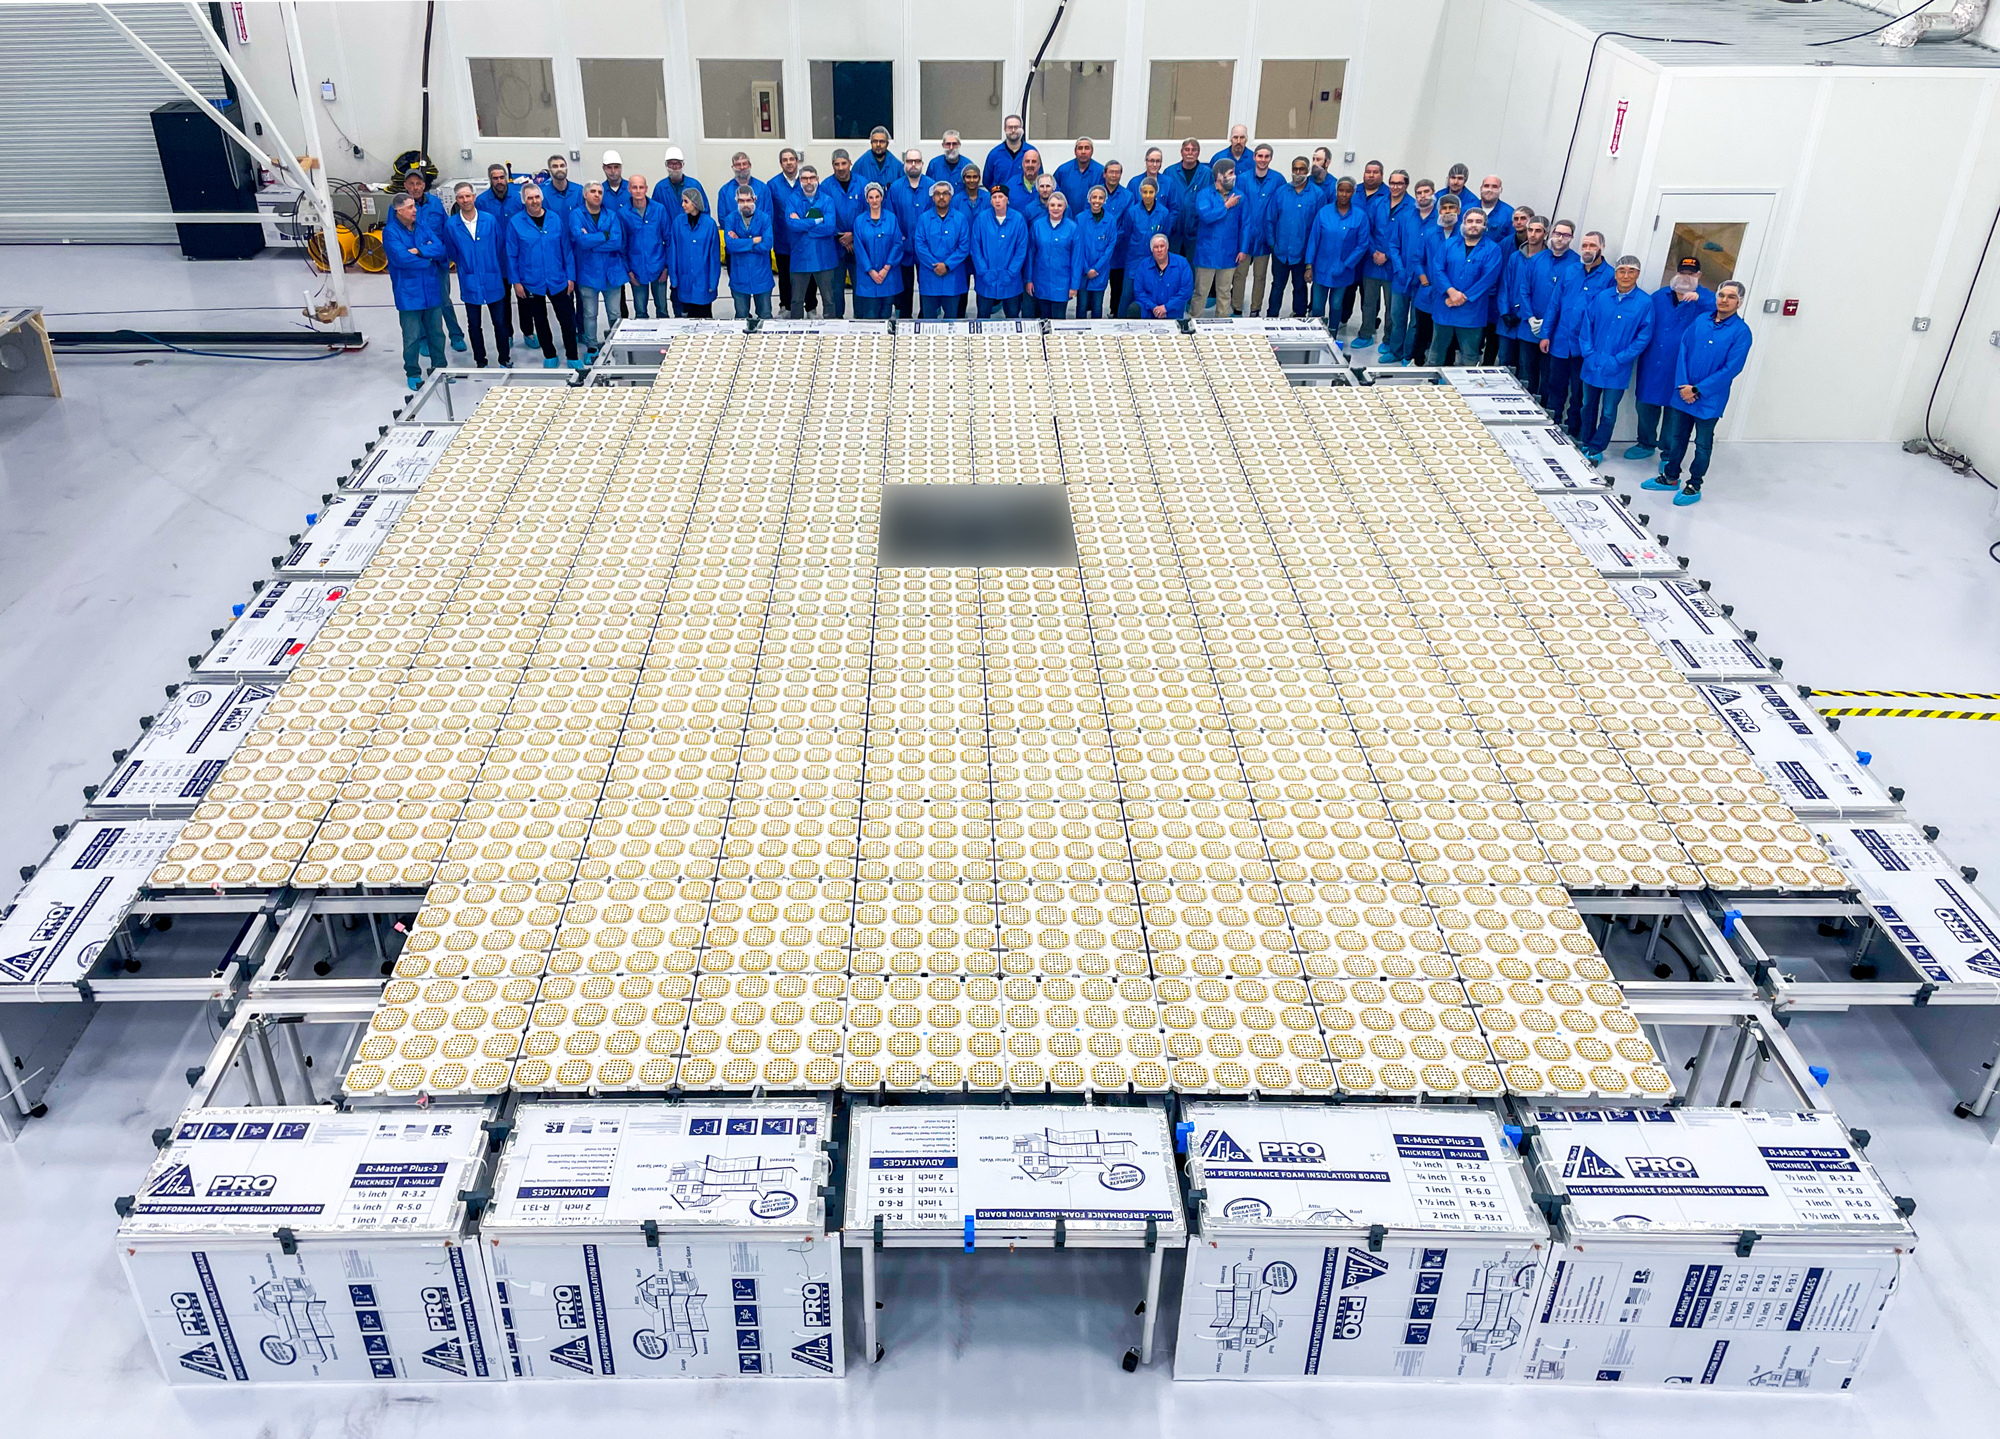 The BlueWalker 3 satellite is seen deployed on Earth with AST SpaceMobile staff around it in a clean room